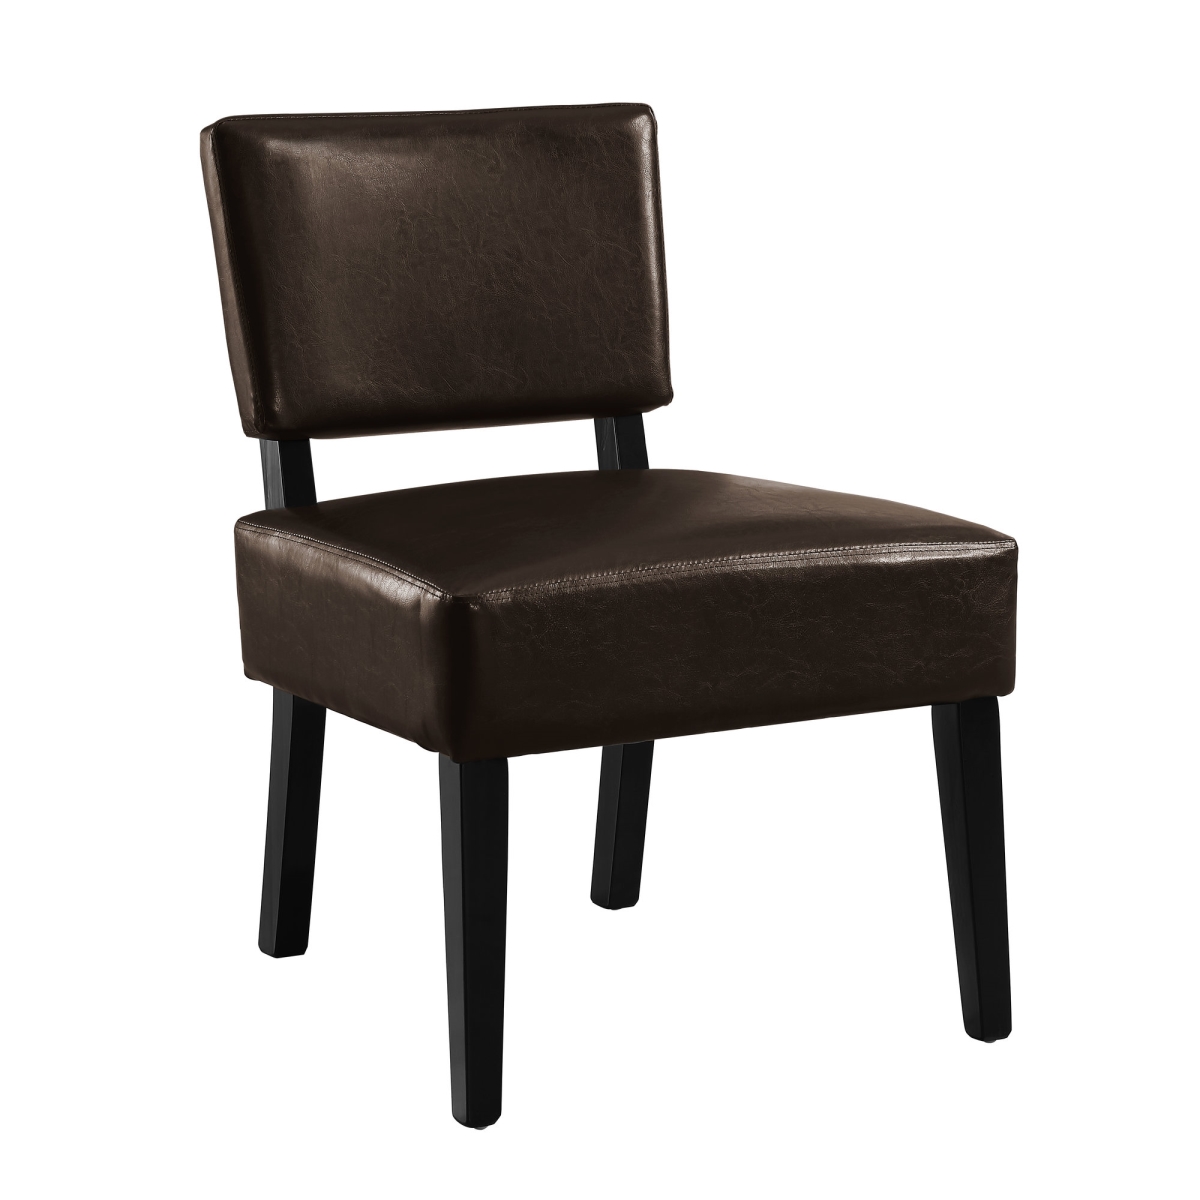 I 8284 Accent Chair, Dark Brown Leather, Look Fabric